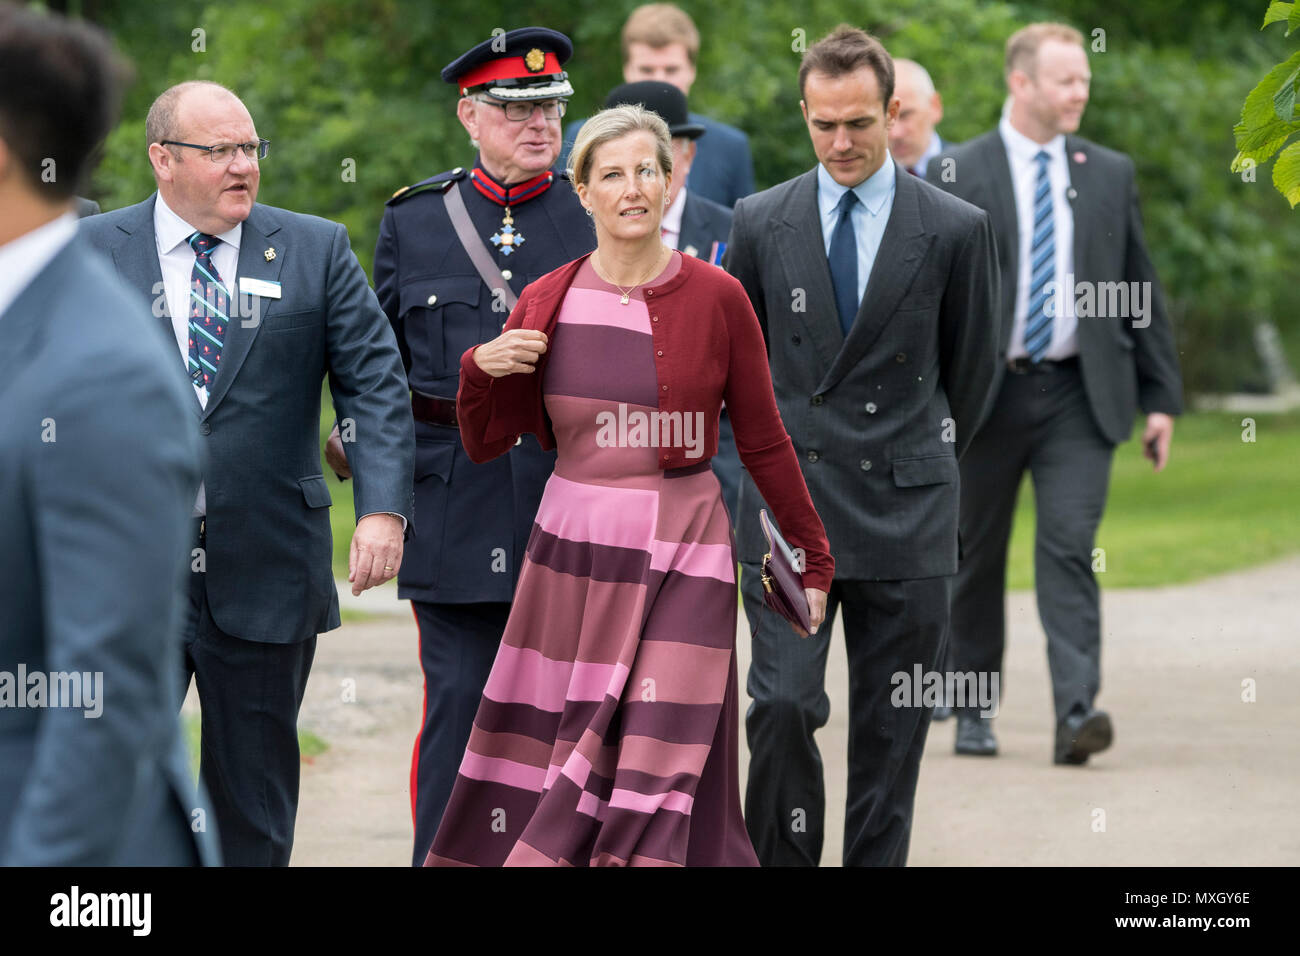 Staffordshire, UK. 4 June 2018 - HRH Sophie, the Countess of Wessex ...